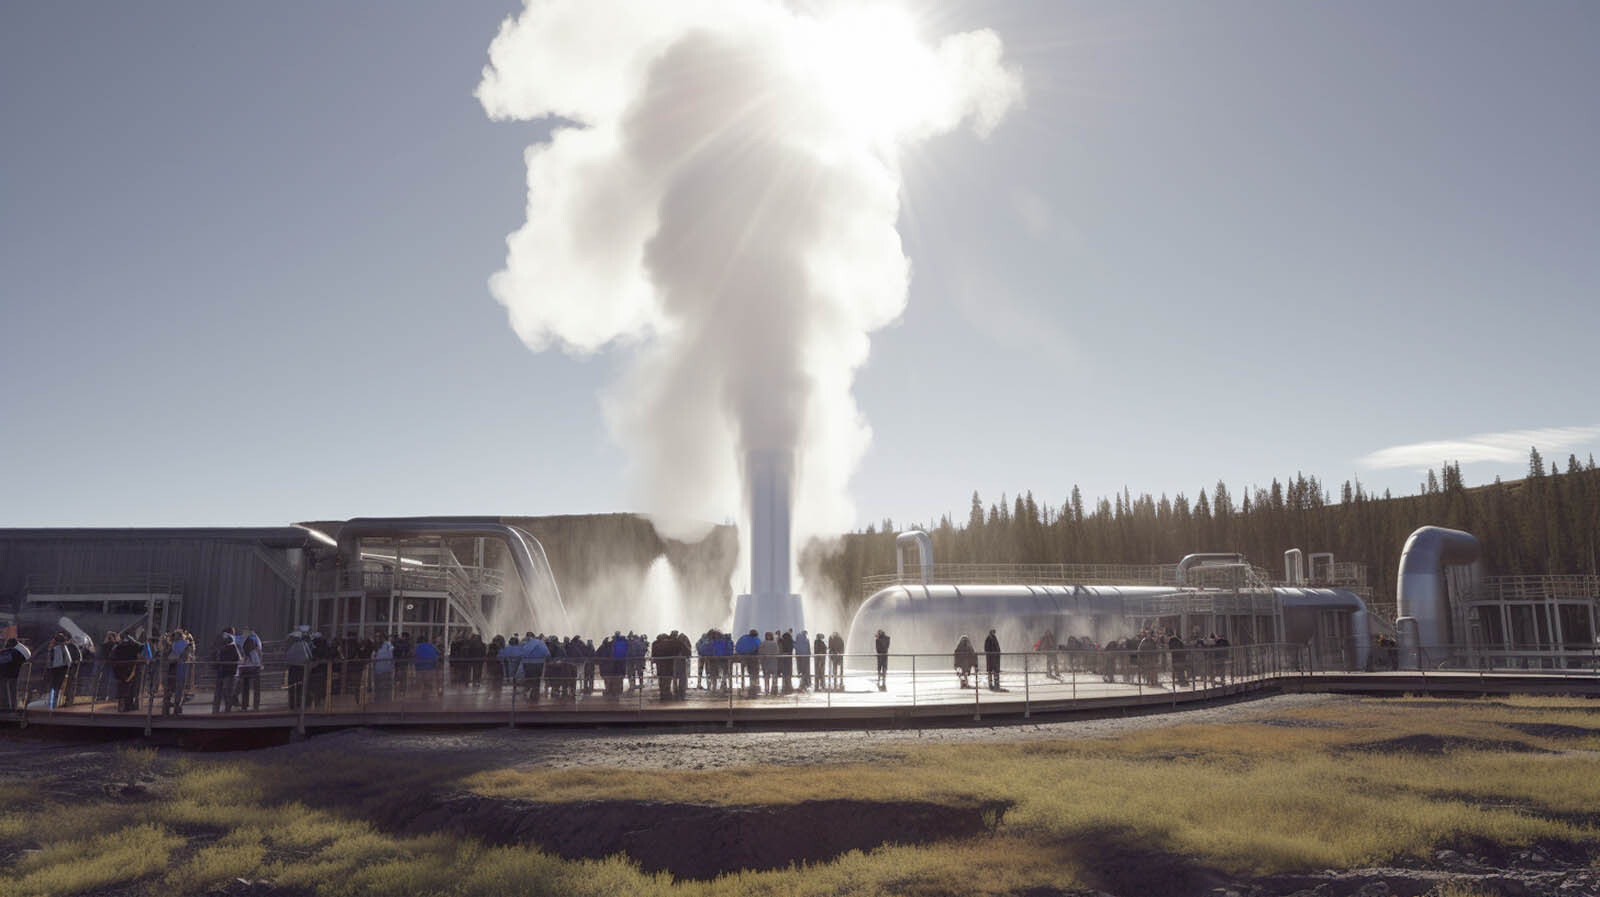 An illustration of spectators gathered around Old Faithful after it’s transformed into a clean energy-producing geothermal plant.